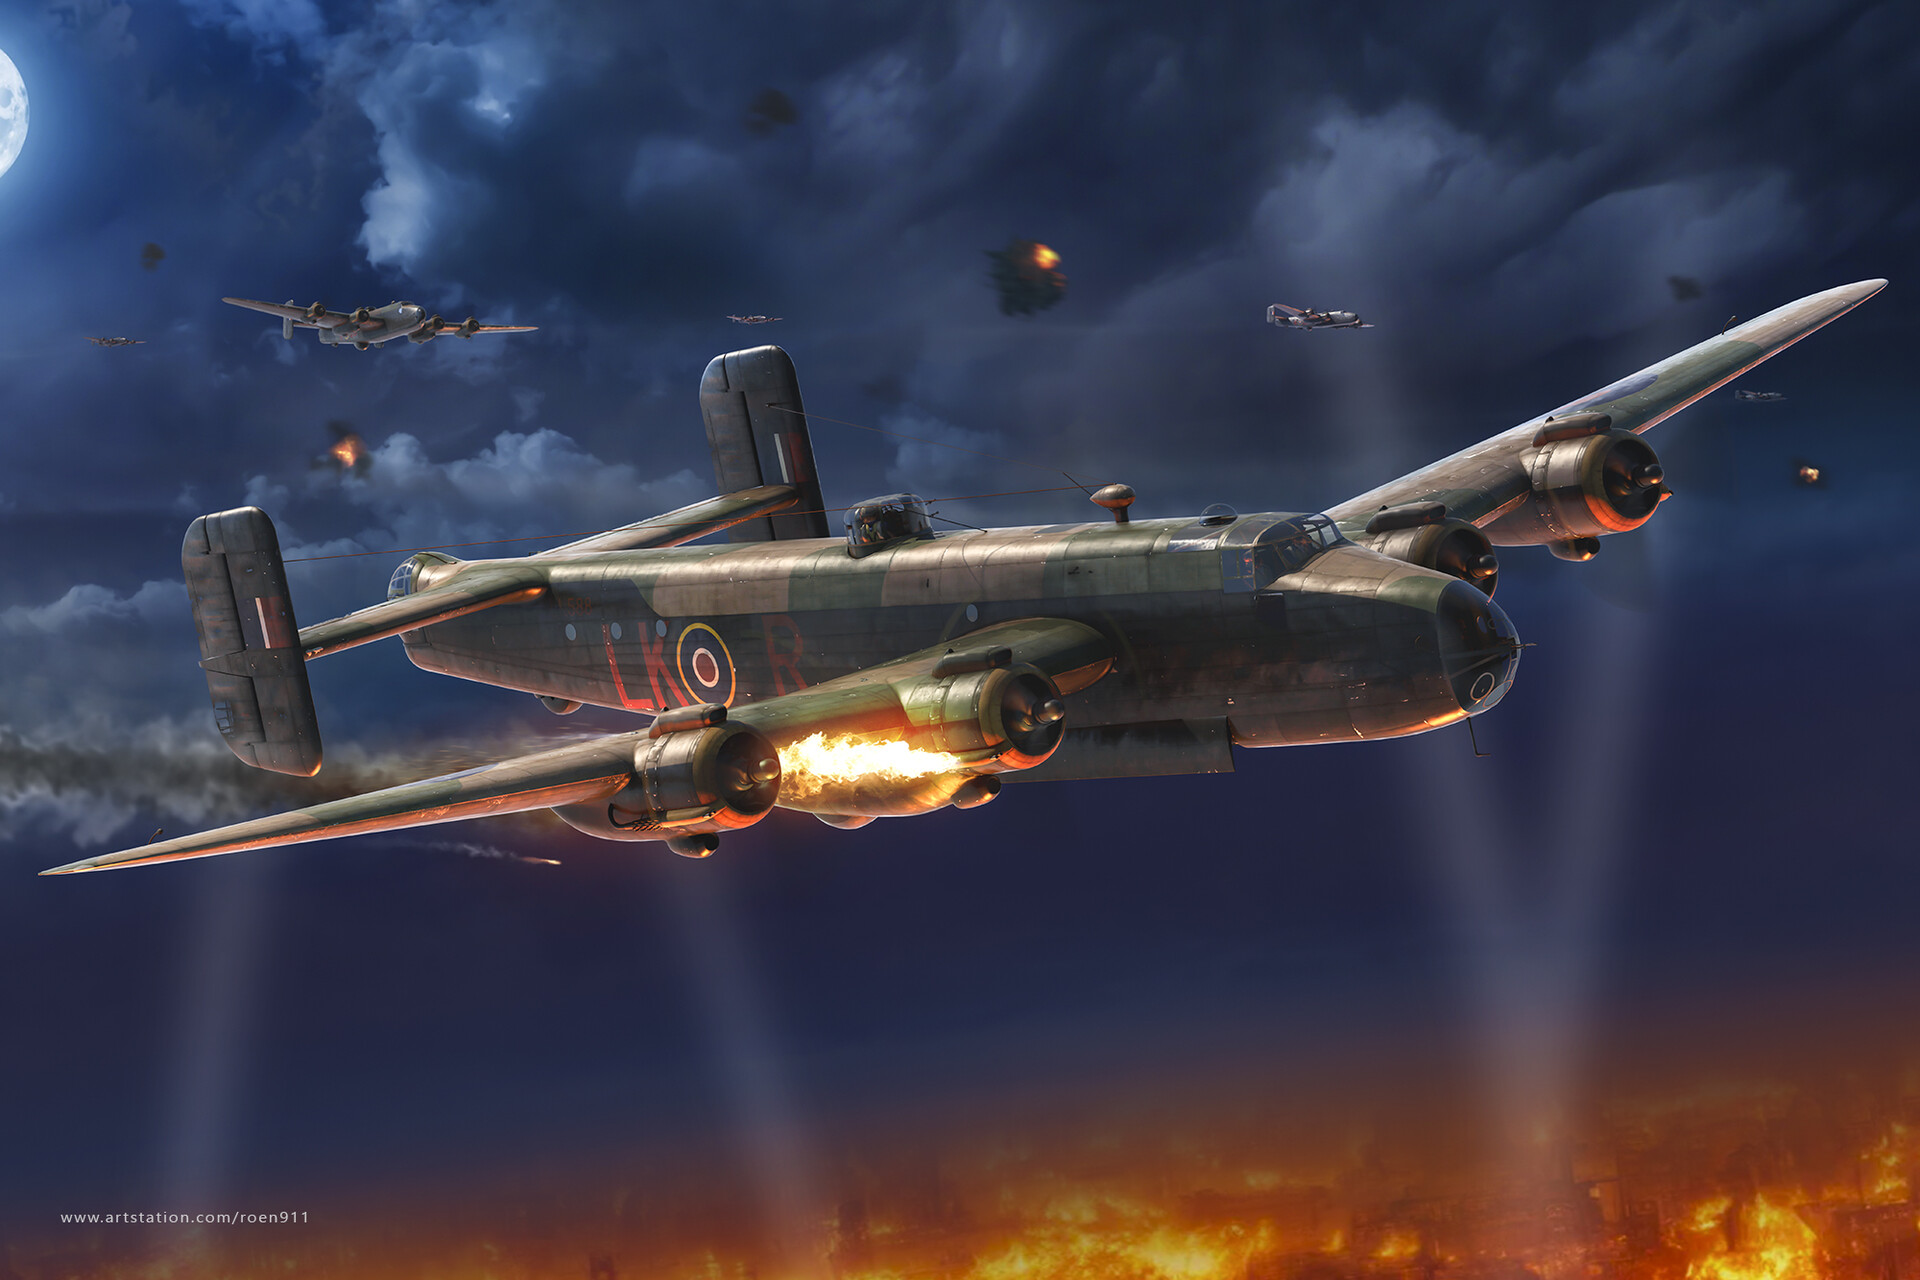 General 1920x1280 Handley Page Handley Page Halifax World War II Royal Air Force Bomber military aircraft clouds air force sky flying night Moon moonlight watermarked fire Antonis Karidis